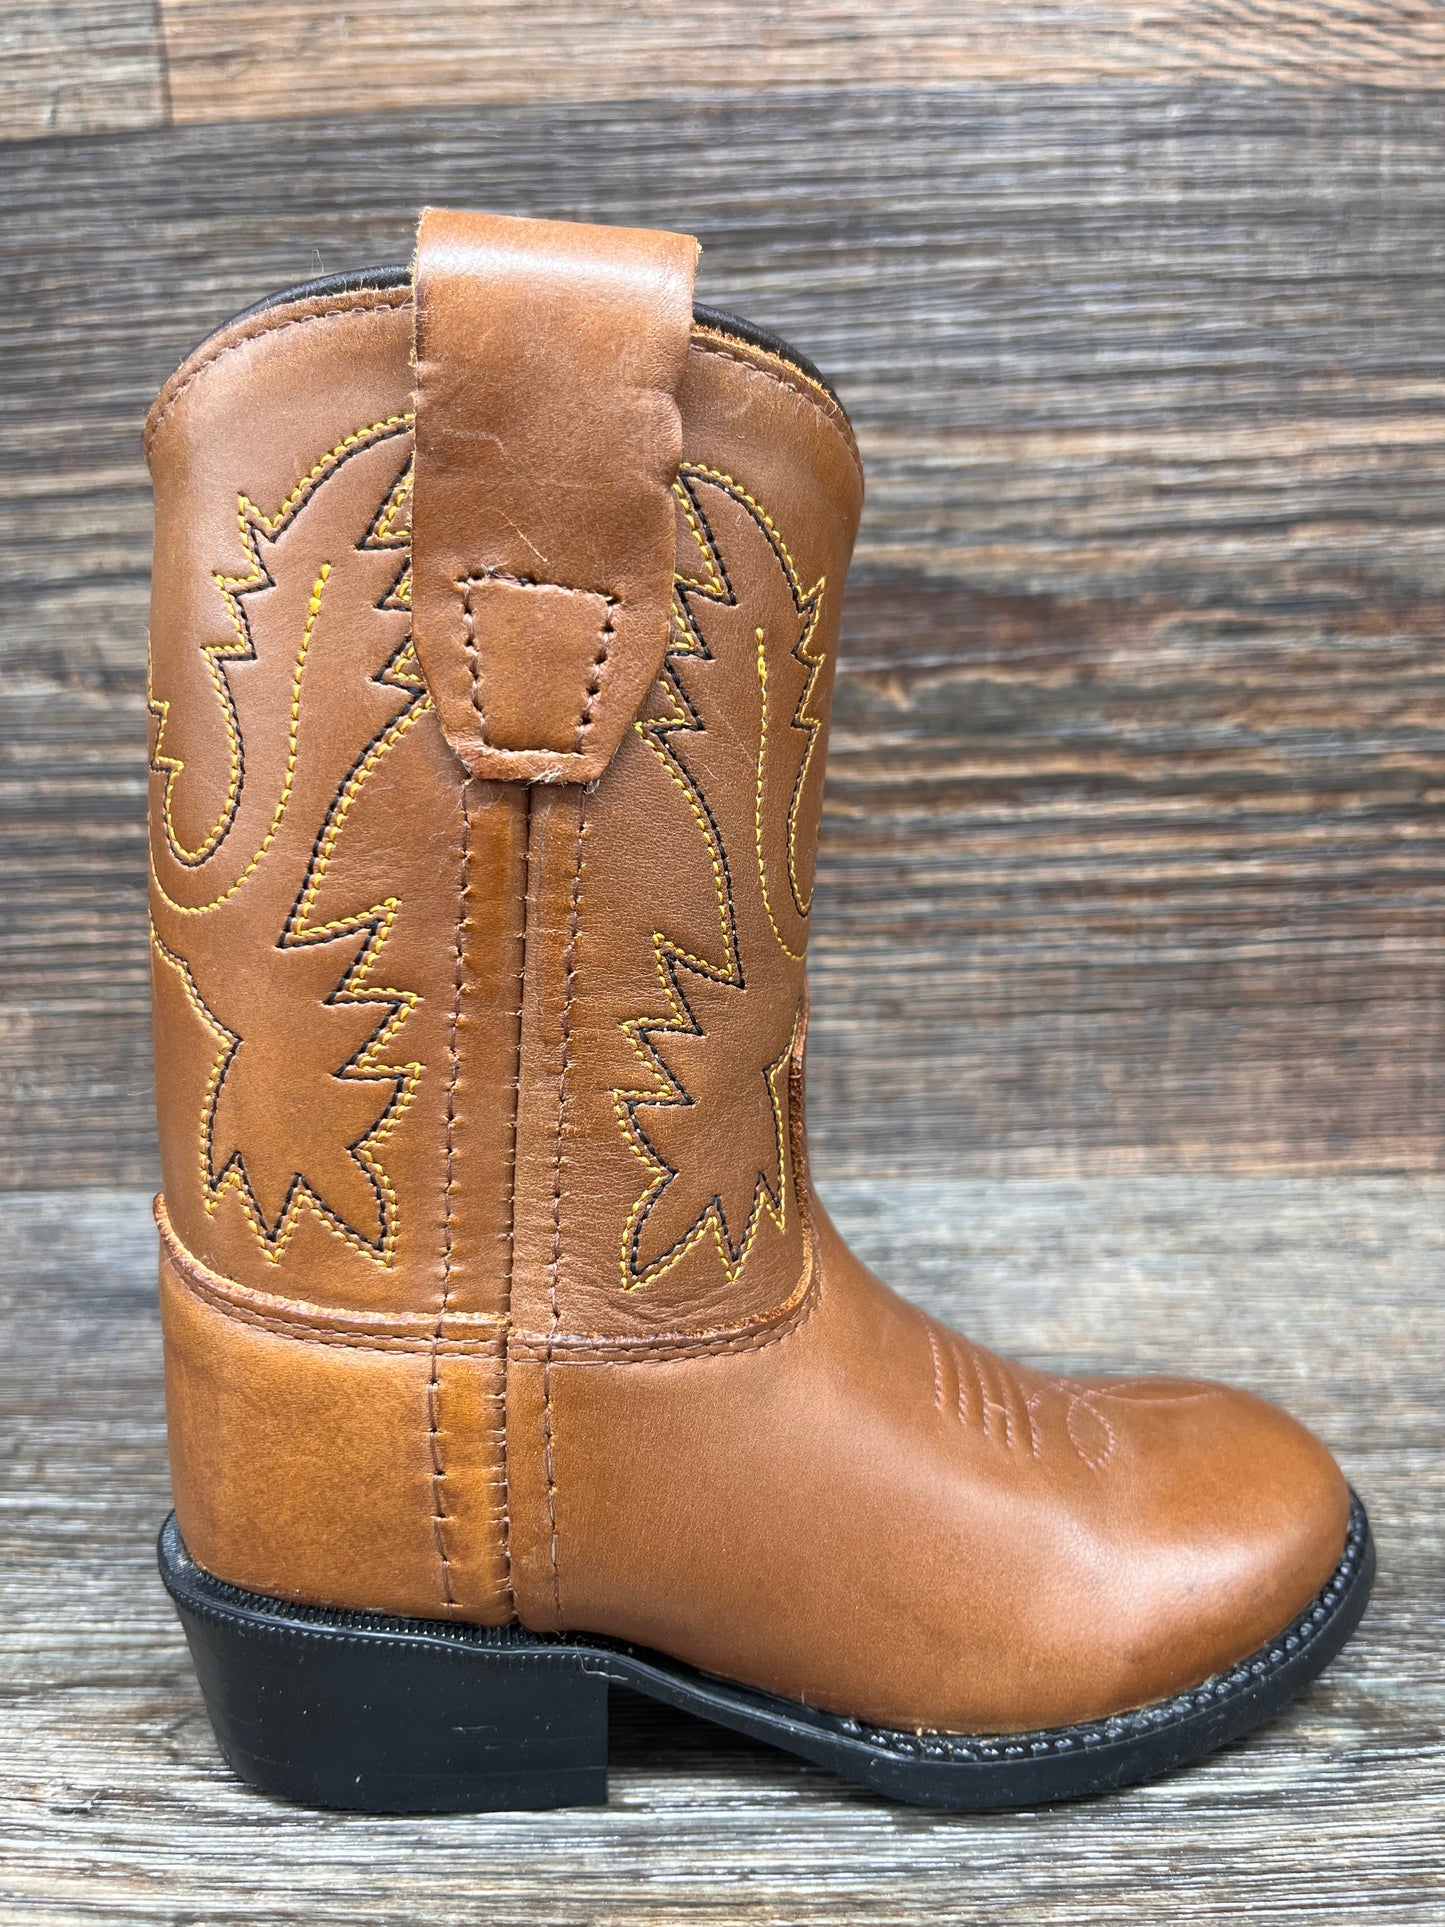 3129 Infant and Toddler Size Round Toe Western Boot by Old West